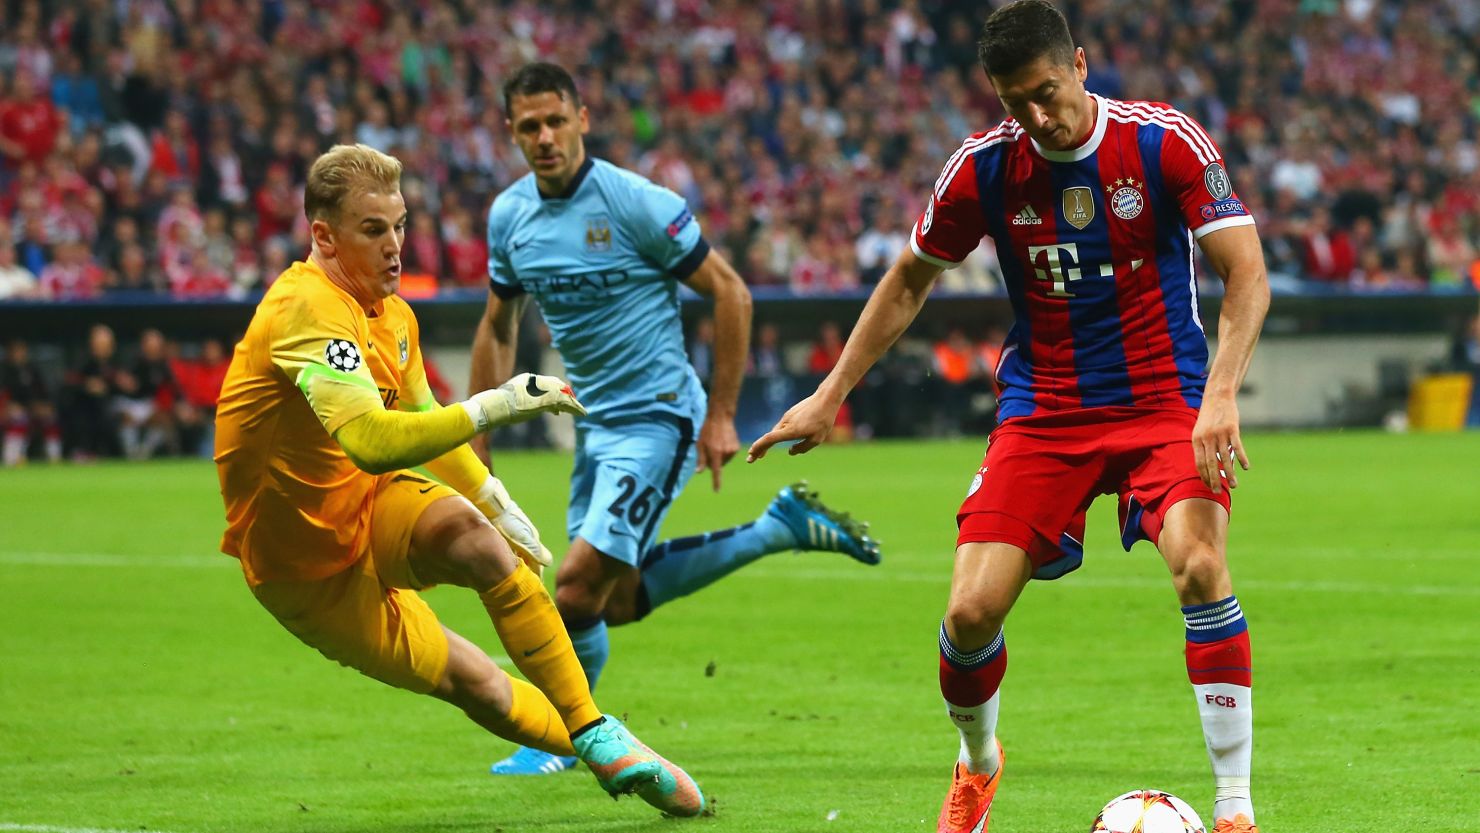 Manchester City goalkeeper Joe Hart produced a number of impressive saves to frustrate Bayern Munich.